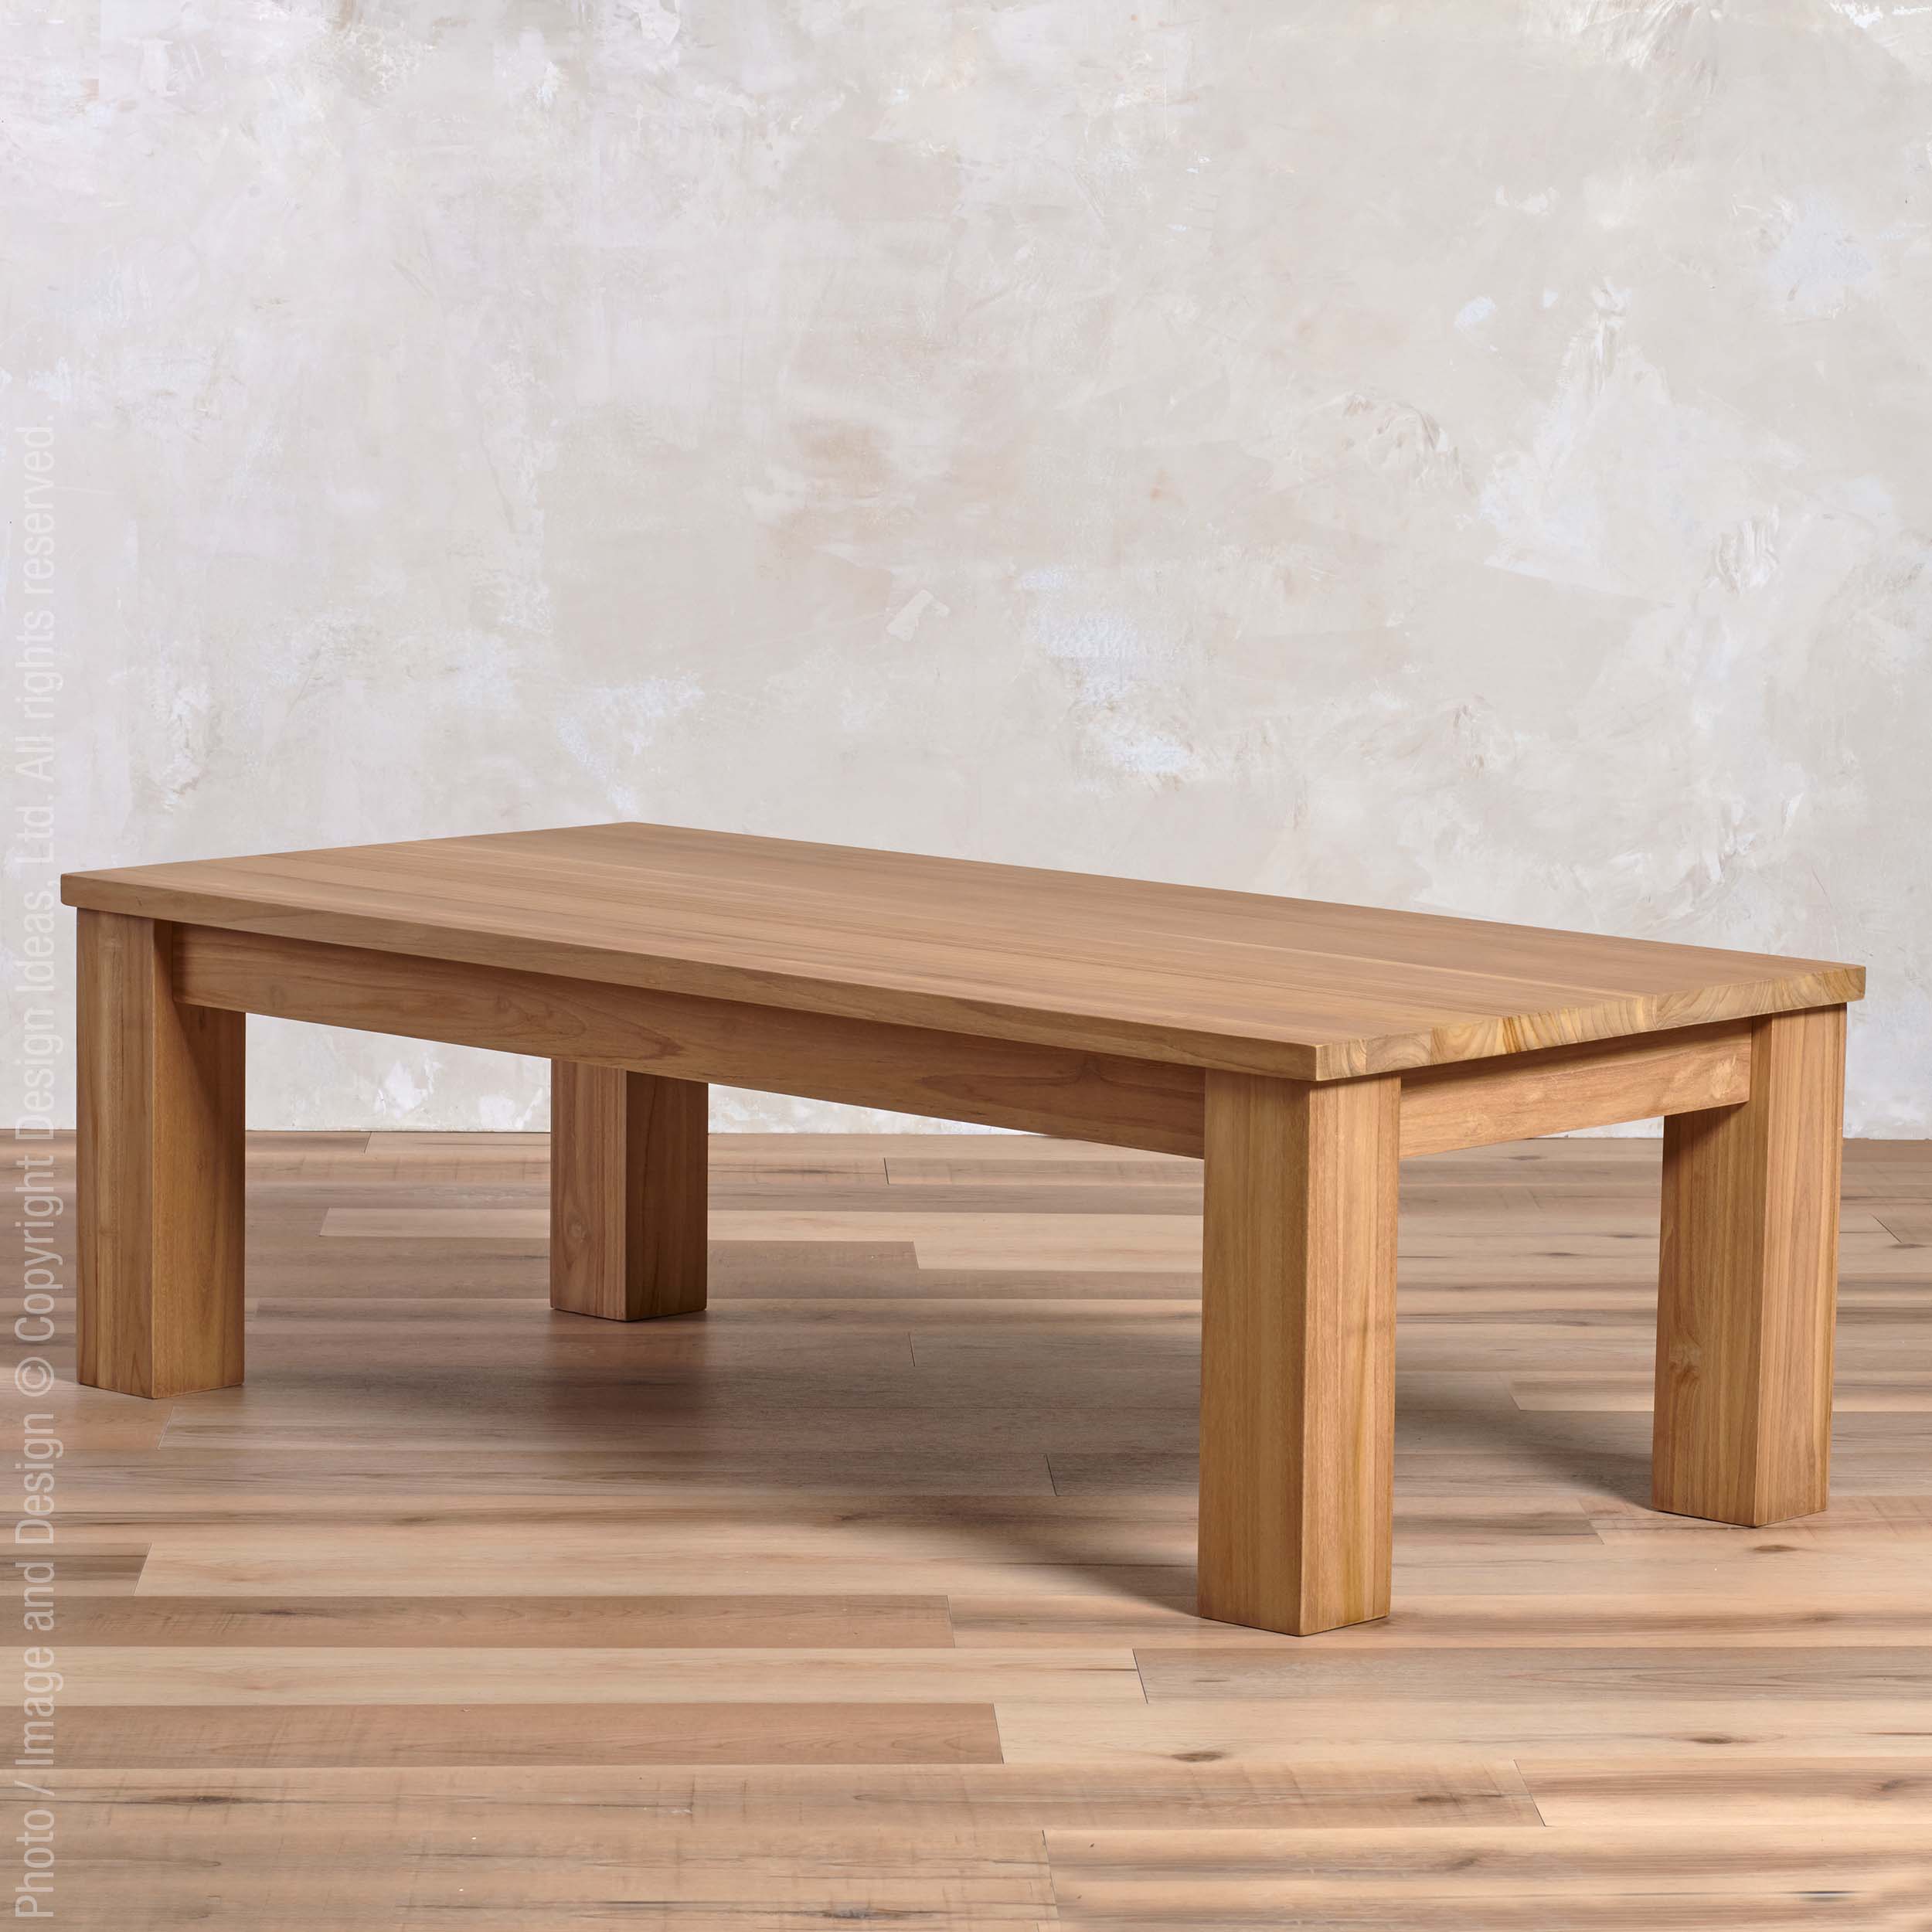 Takara™ Teak Rectanglar Coffee Table | Image 3 | From the Takara Collection | Elegantly made with natural teak for long lasting use | Available in natural color | texxture home